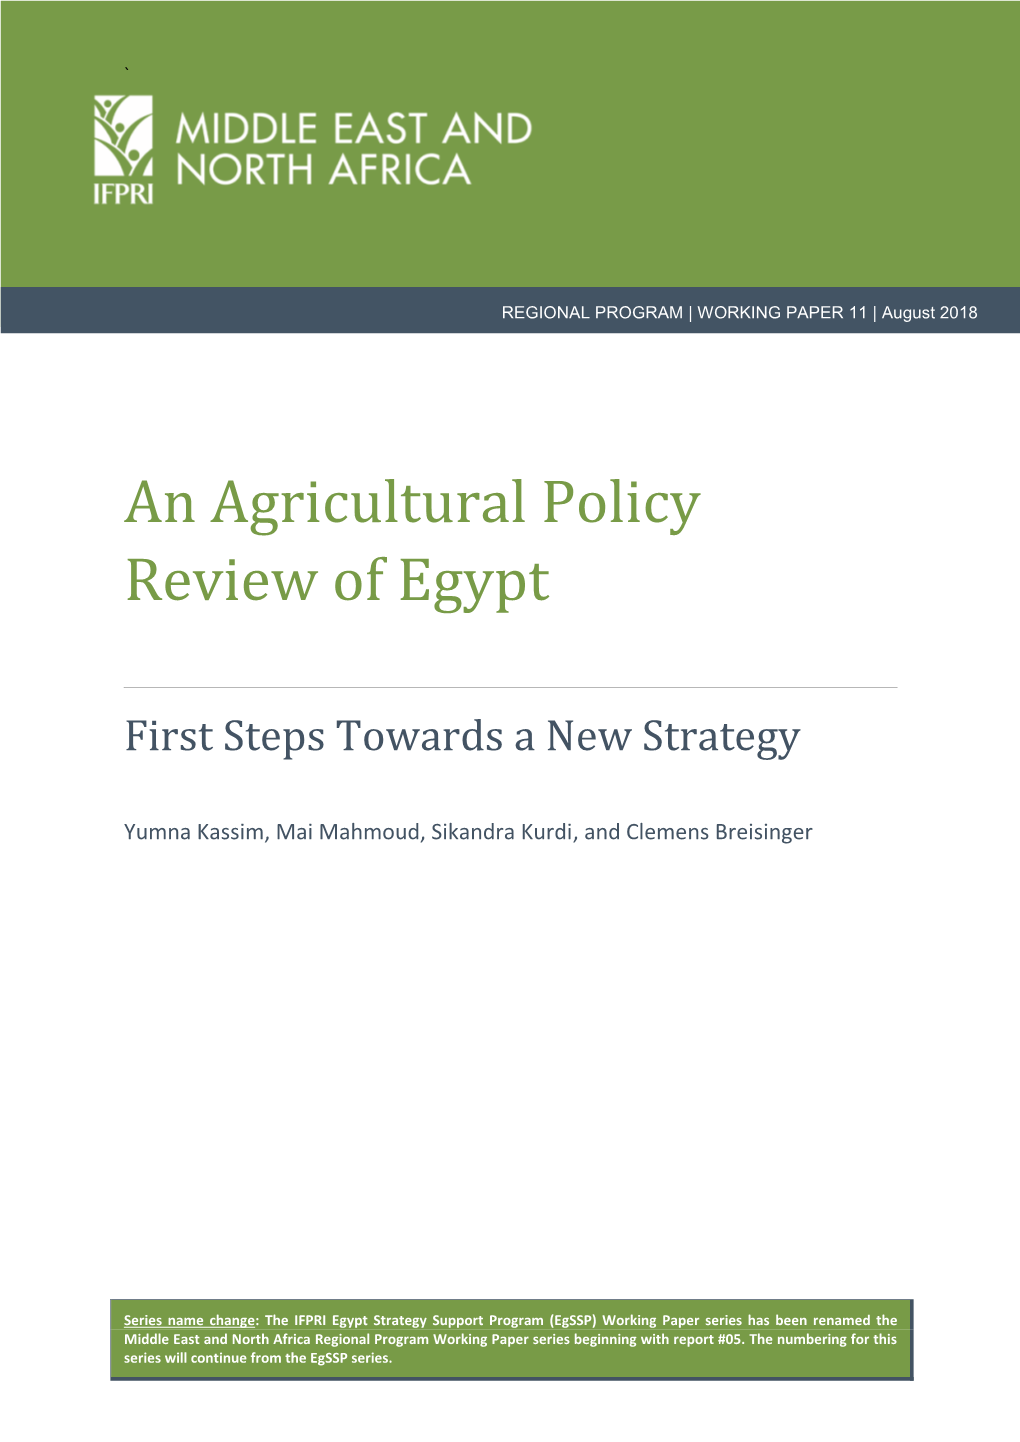 An Agricultural Policy Review of Egypt